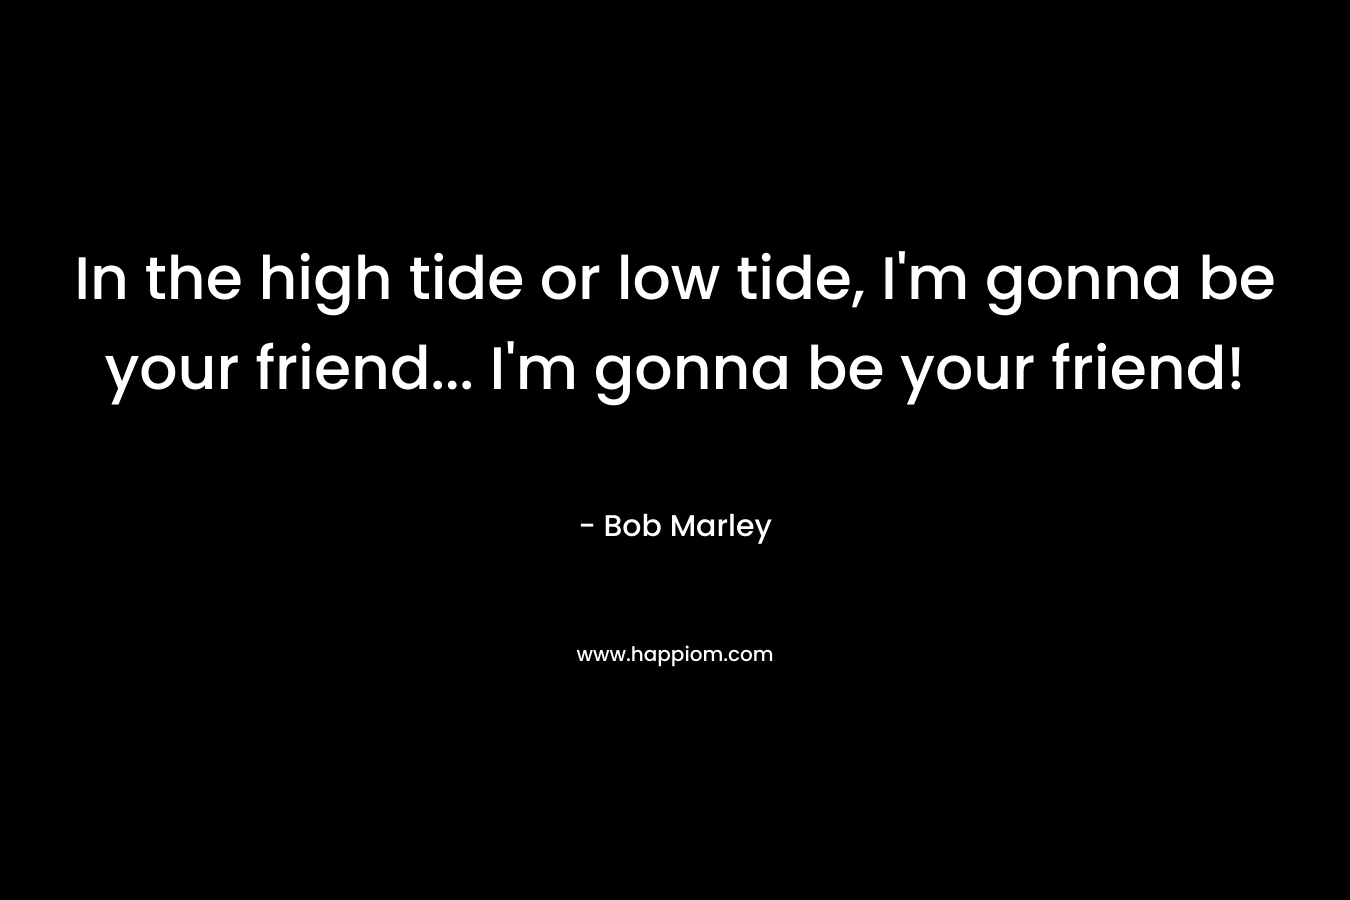 In the high tide or low tide, I'm gonna be your friend... I'm gonna be your friend!